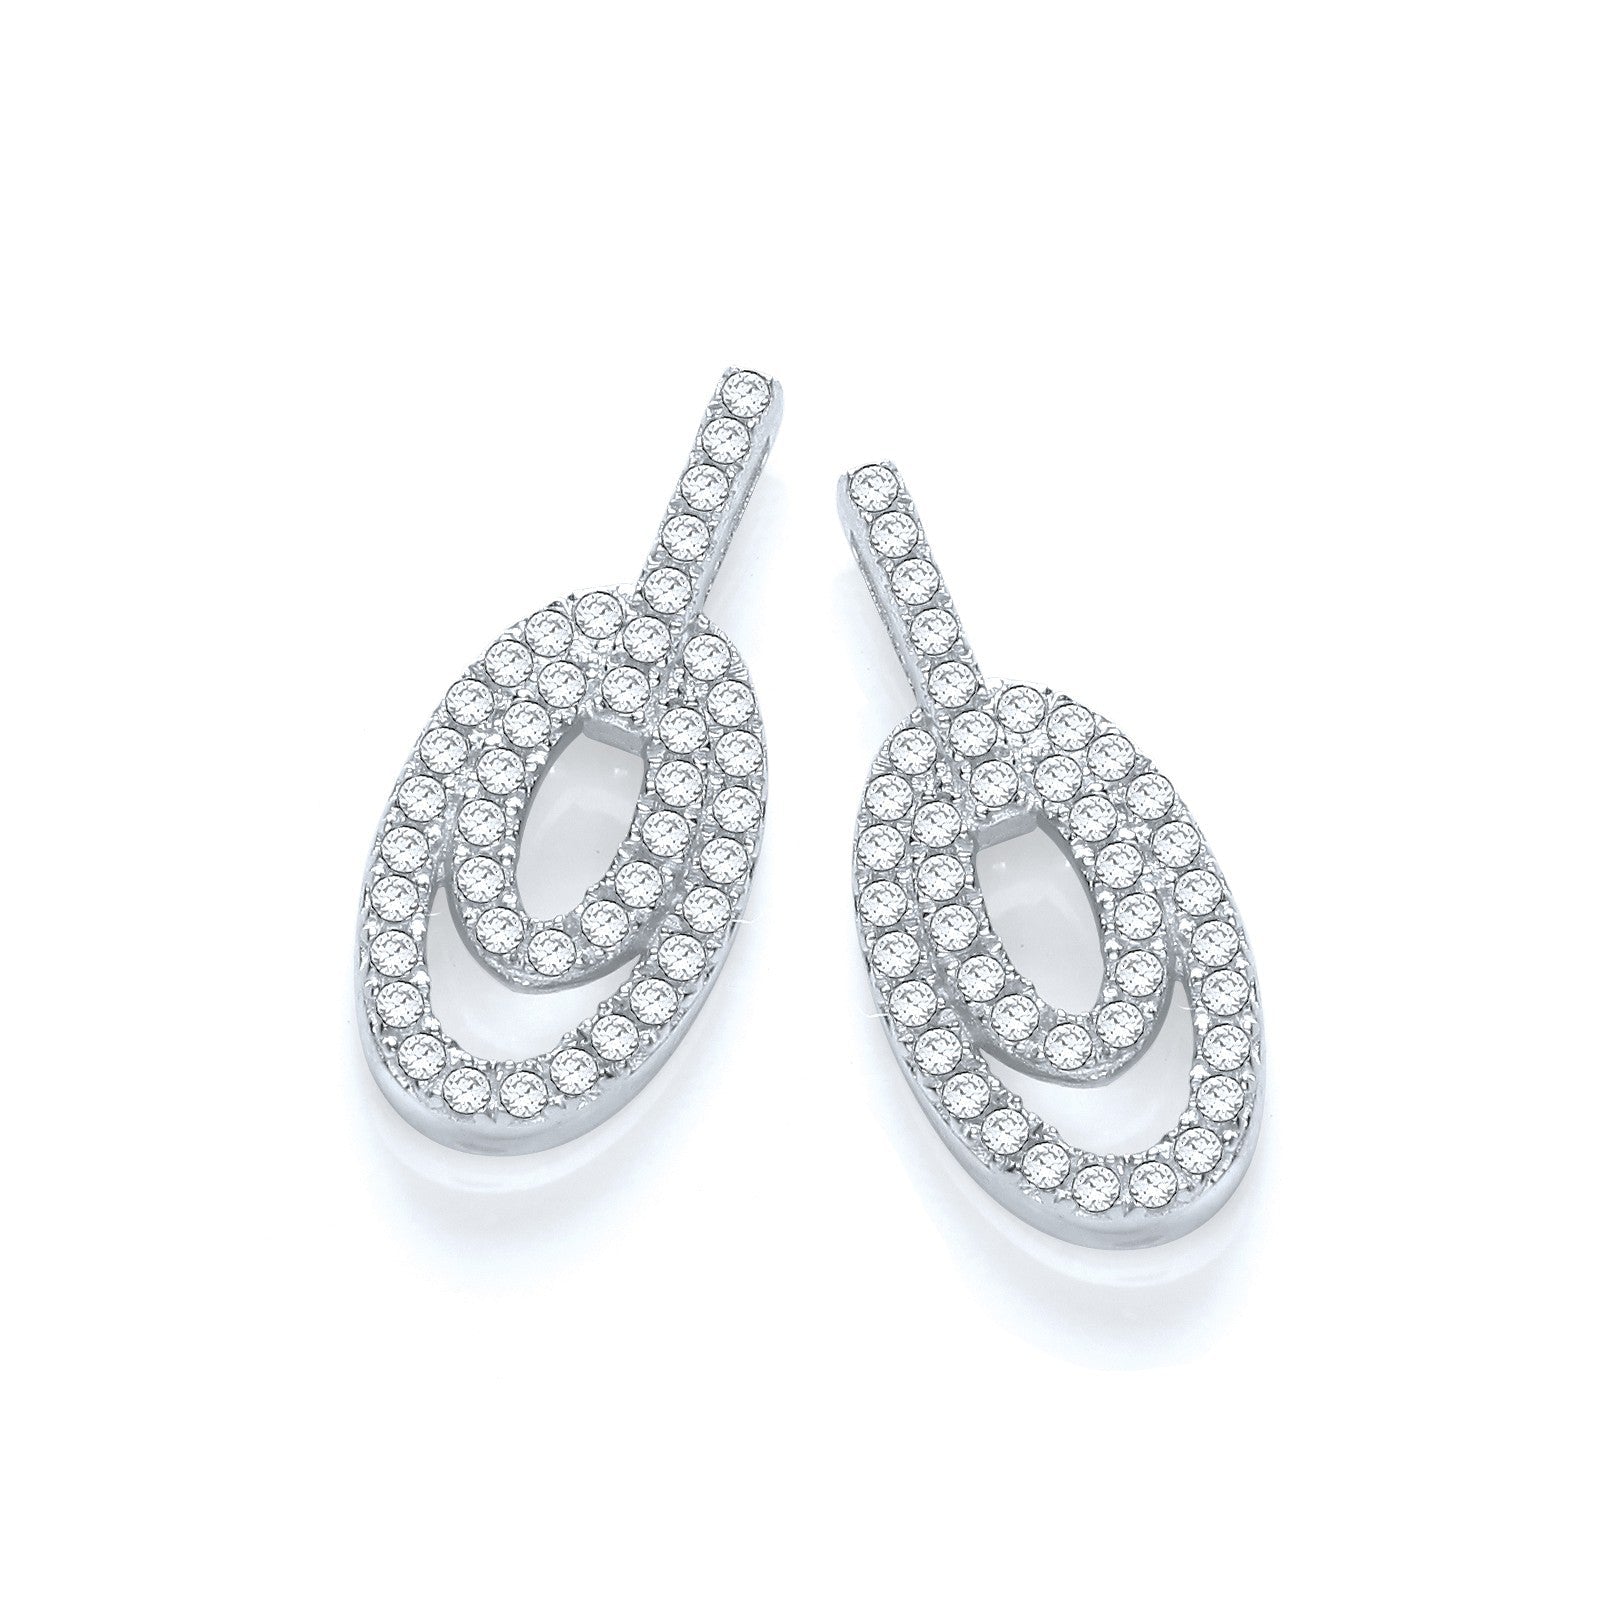 Stud 925 Sterling Silver 17 mm Earrings Set With CZs - FJewellery